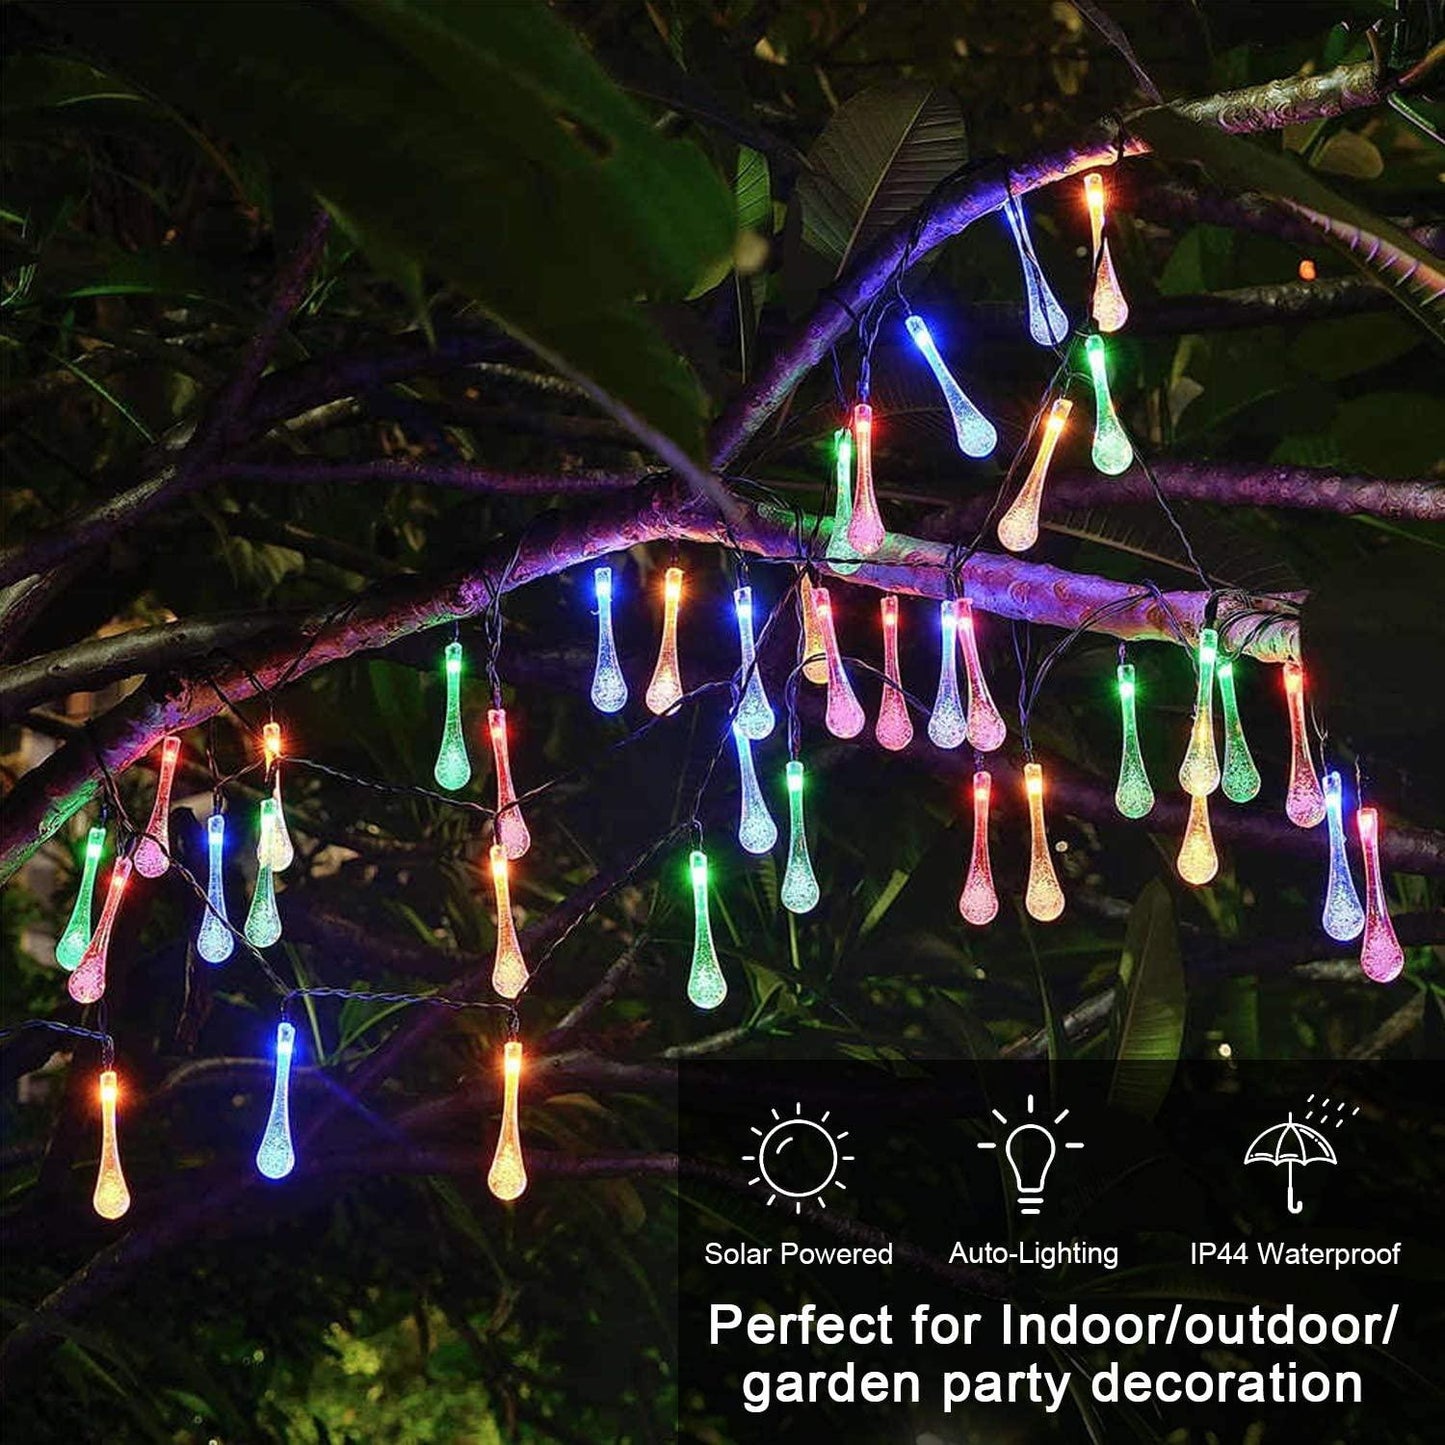 Solar-Powered Raindrop String Lights - If you say i do